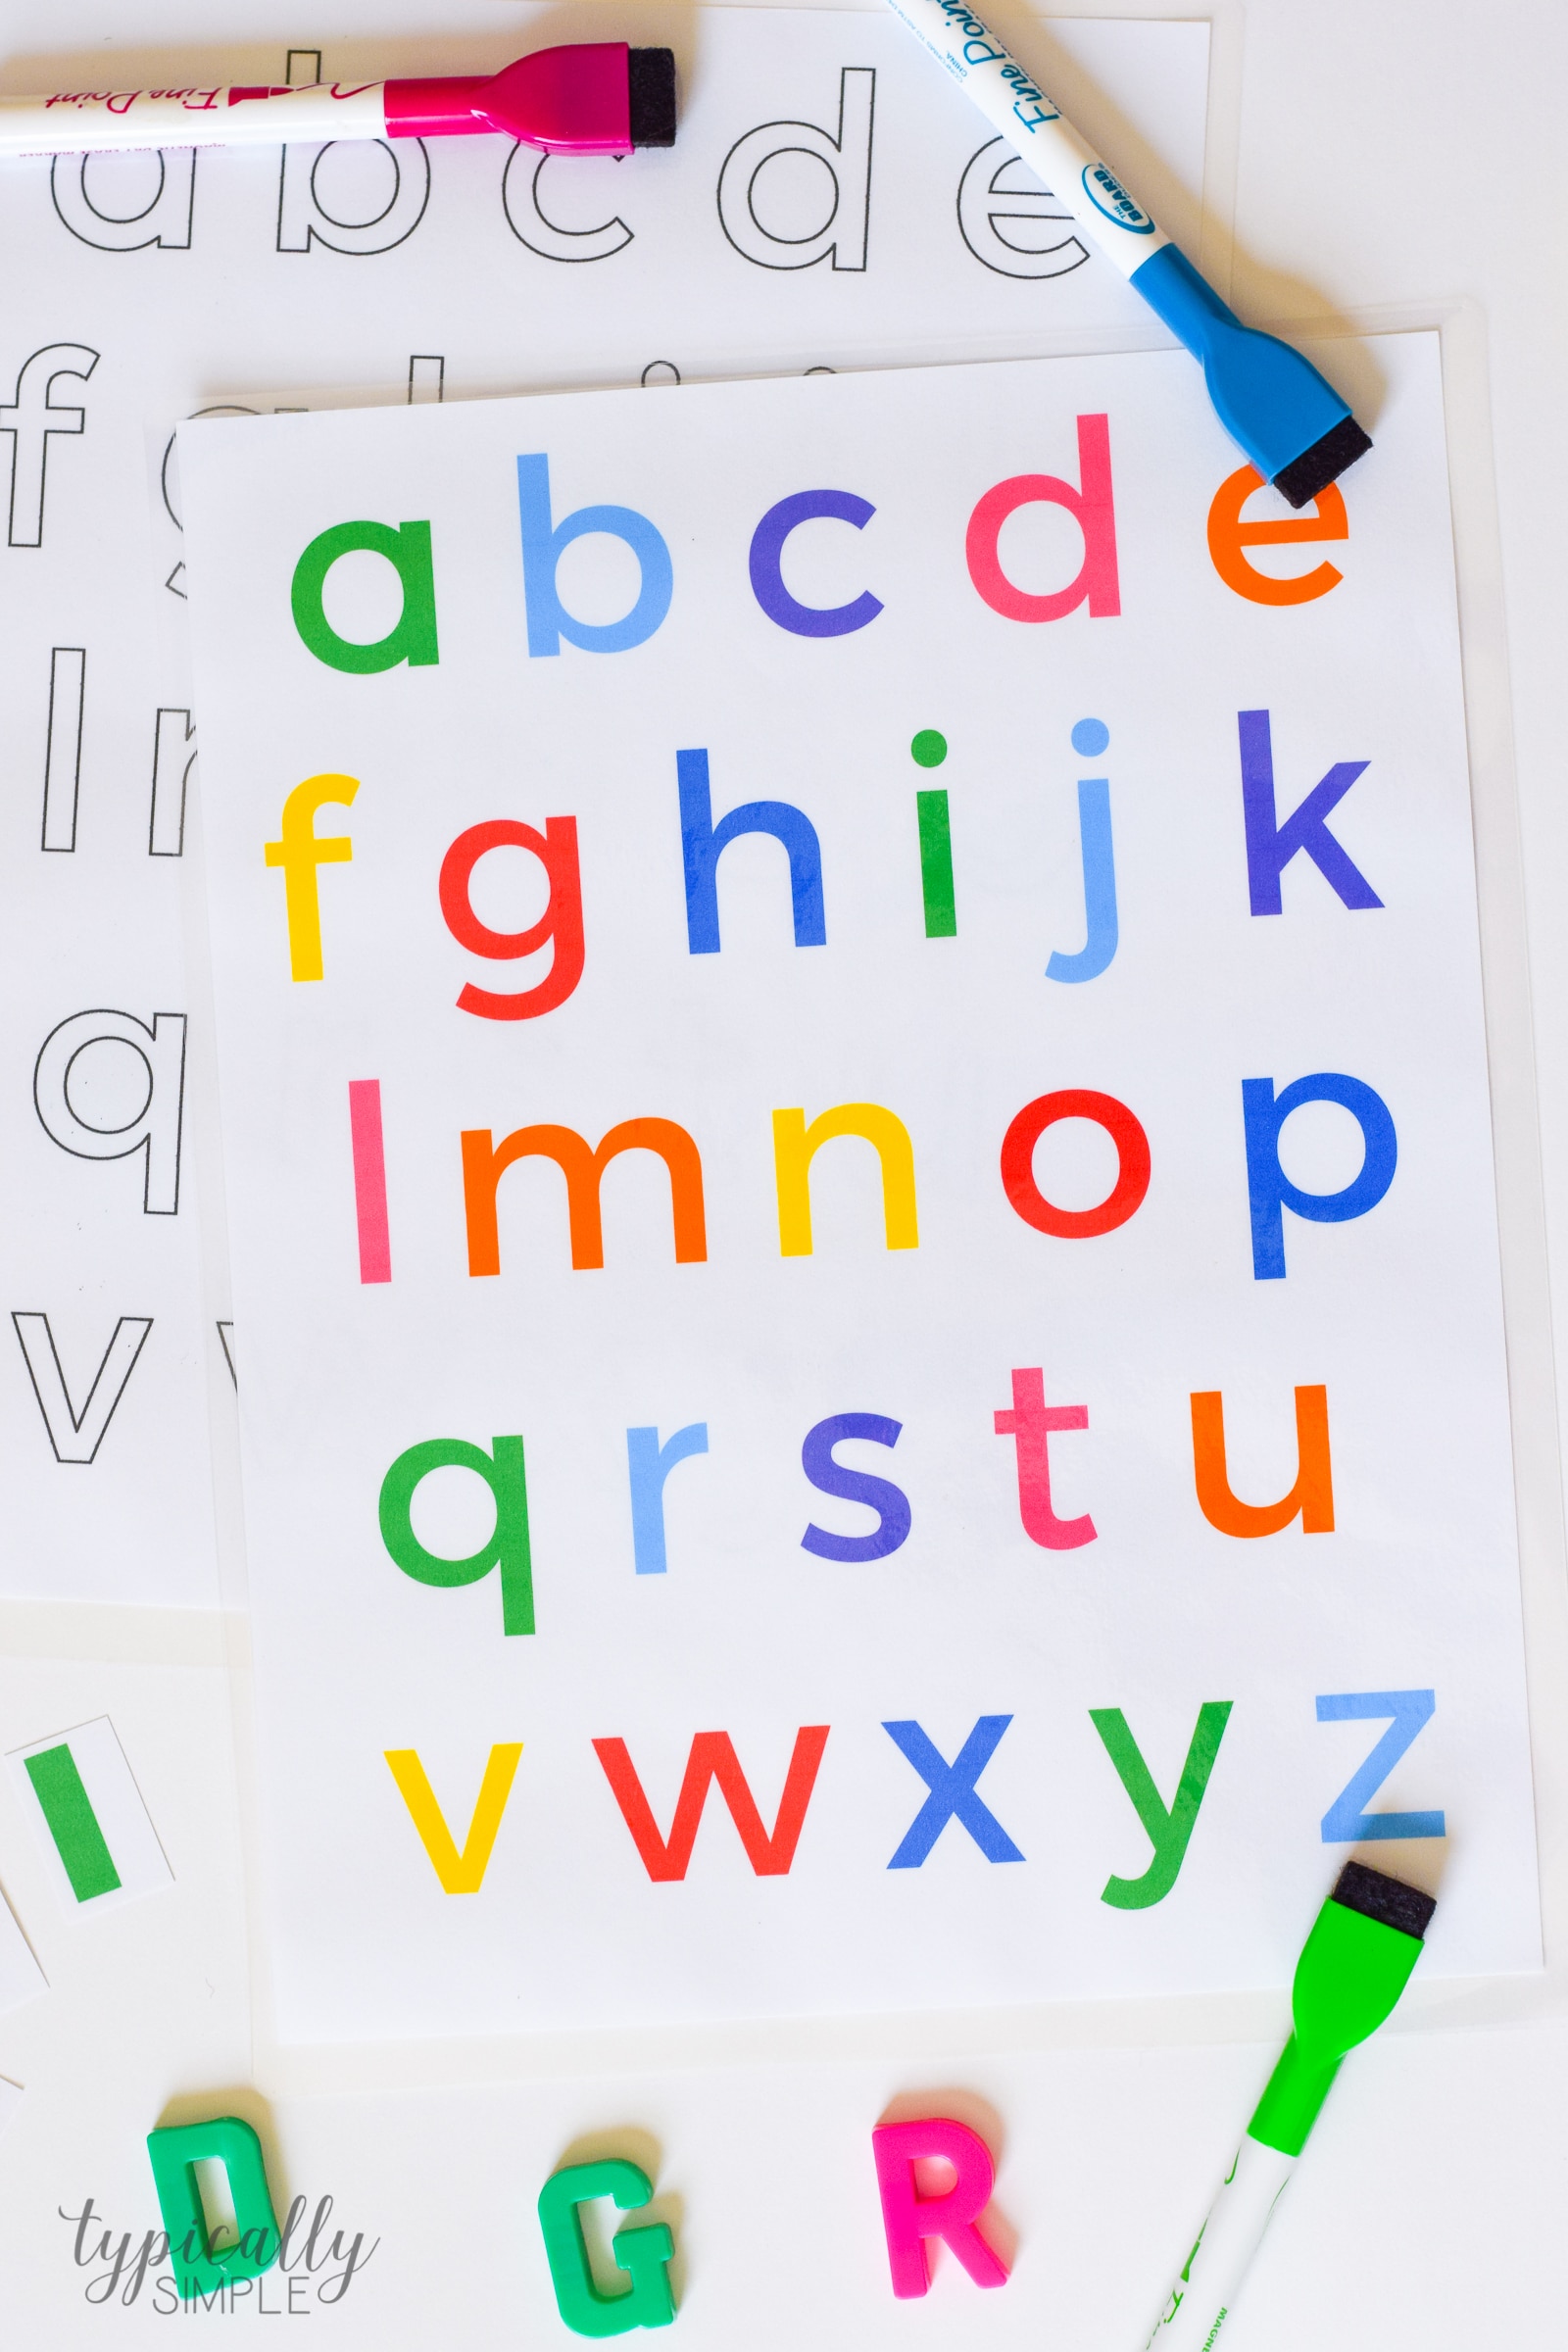 Alphabet Activities Lowercase Letters Printable Typically Simple